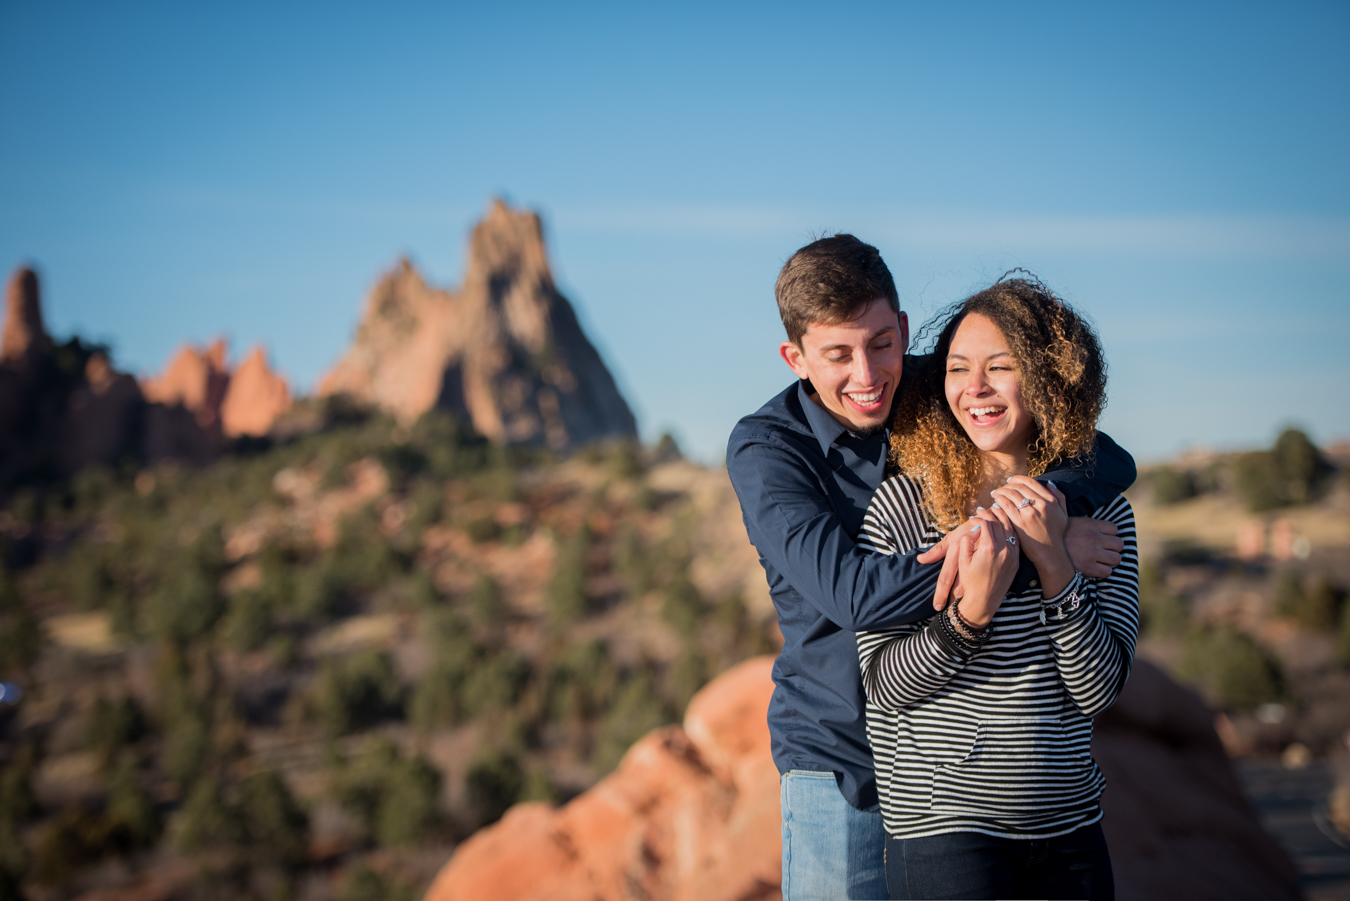 Proposal | High Point Overlook | Colorado Springs, CO